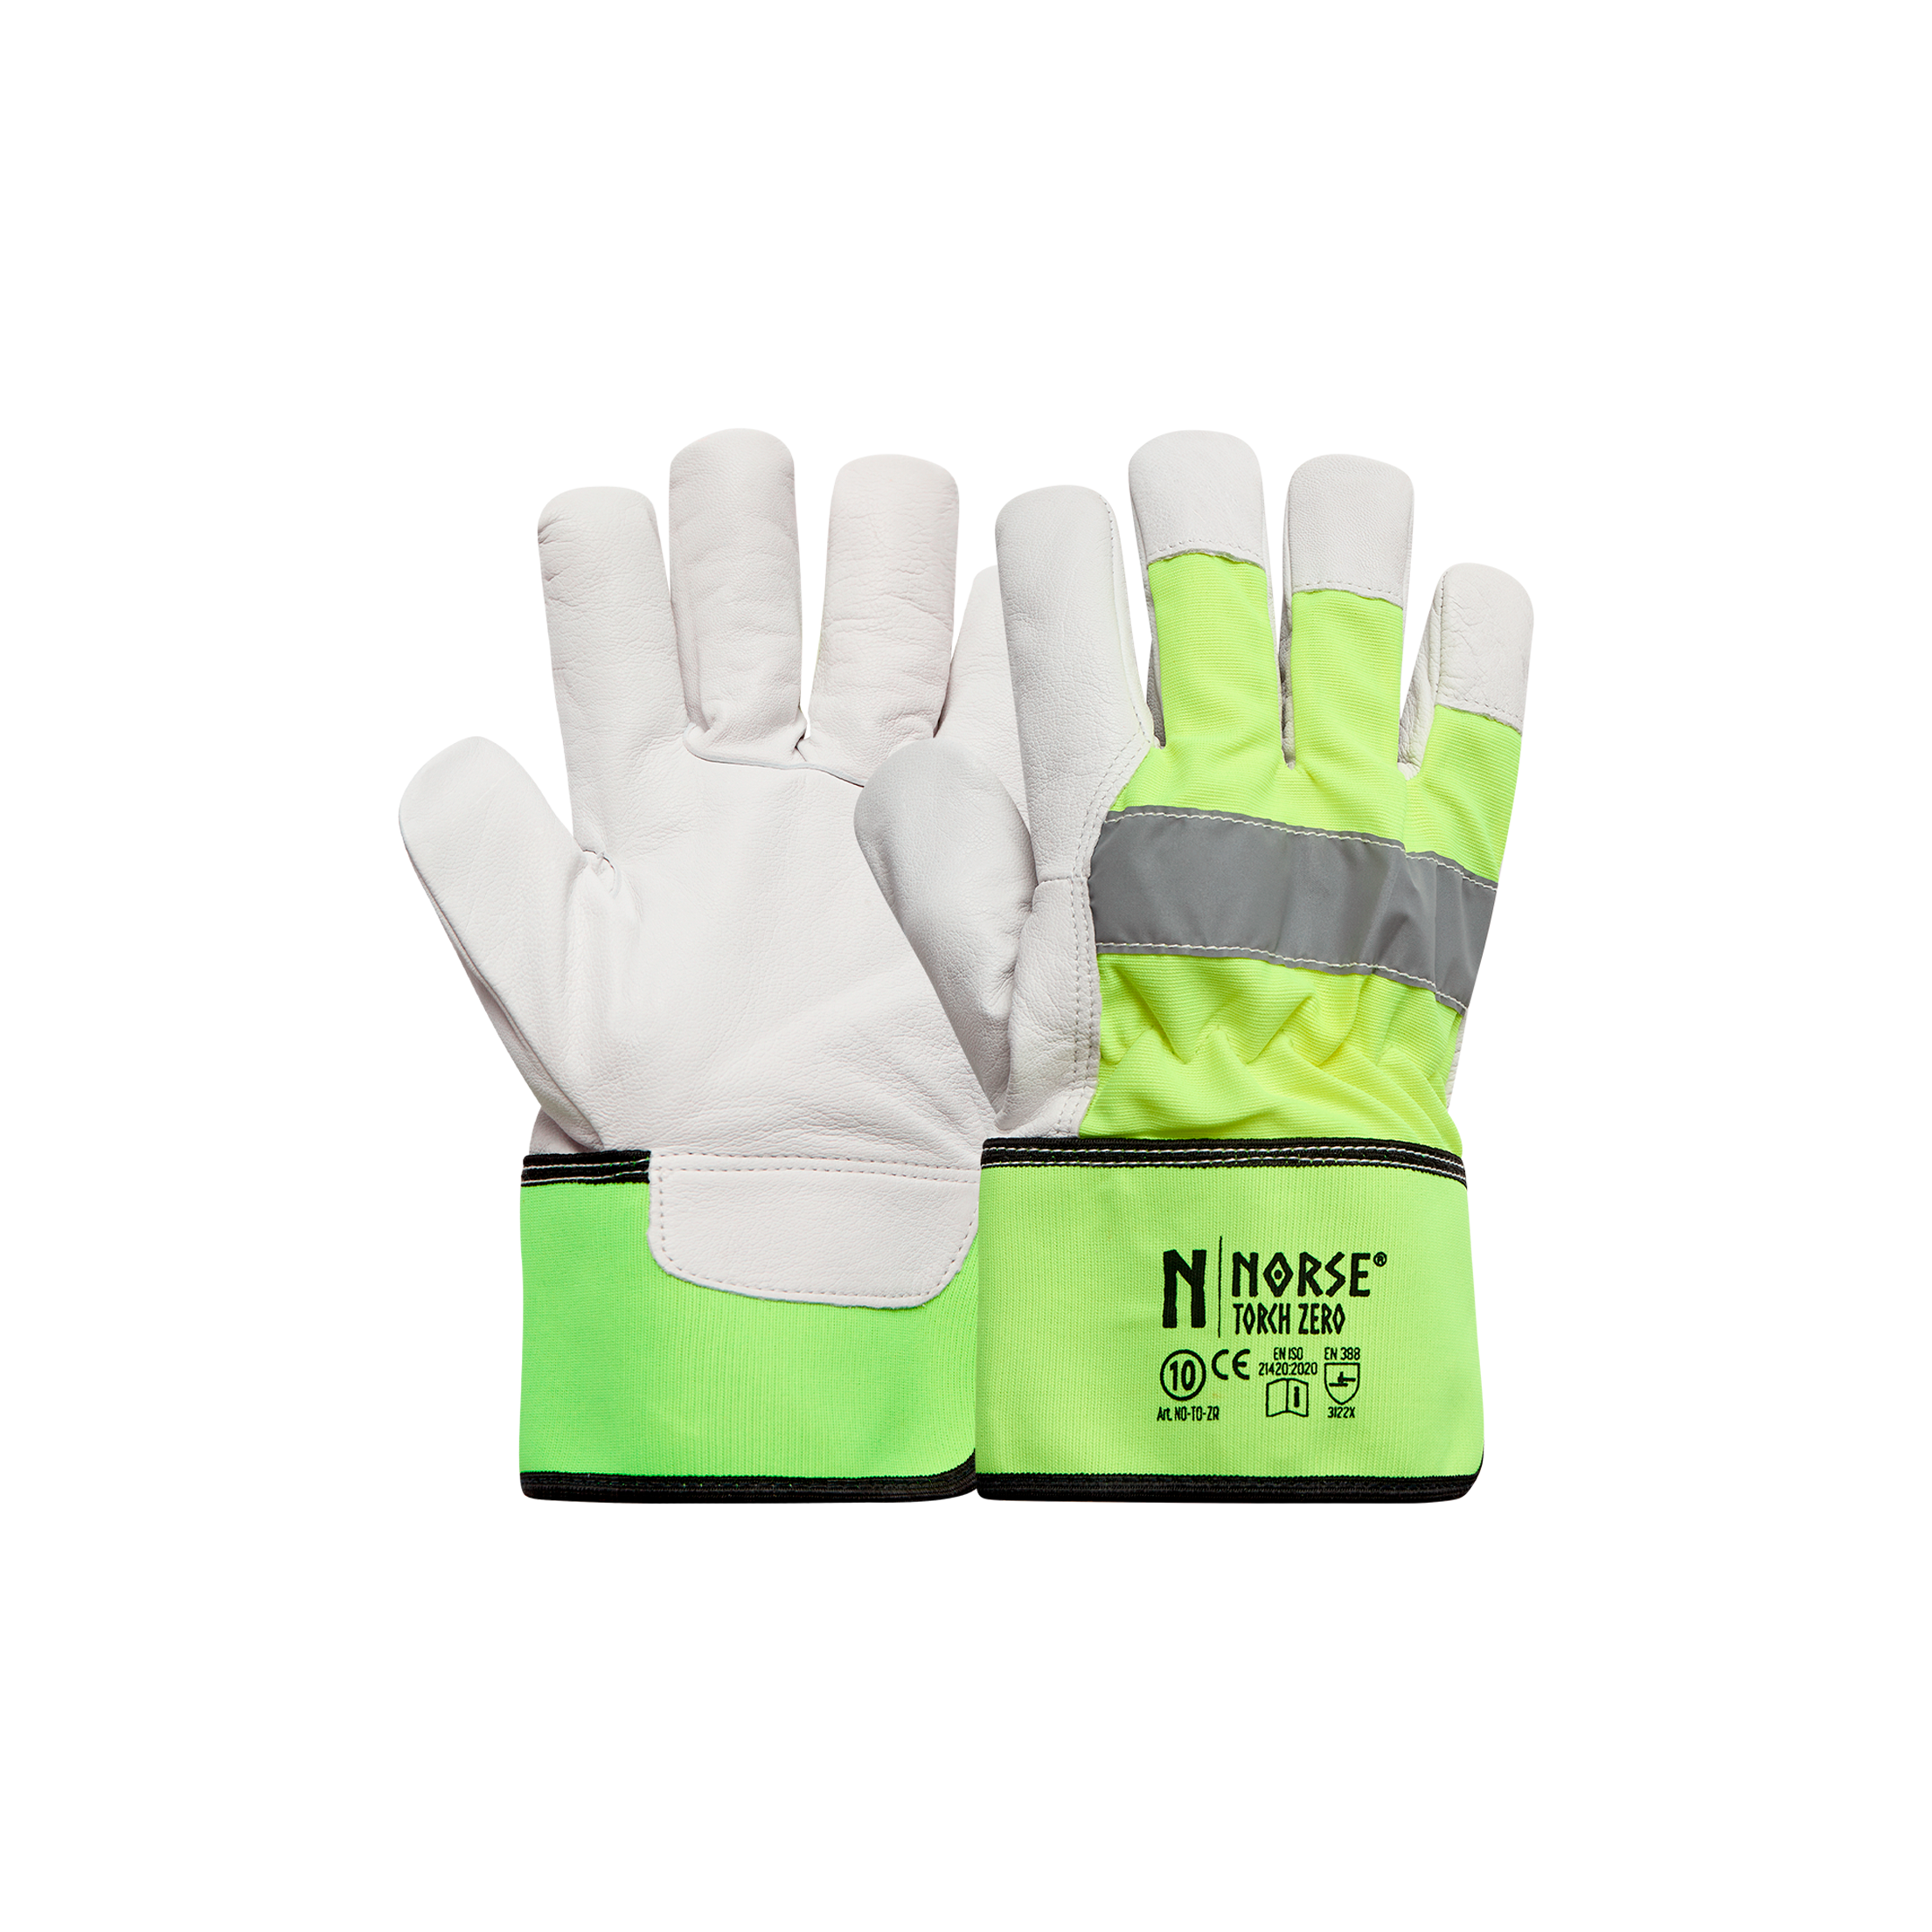 Torch Zero | High Visibility Leather Gloves